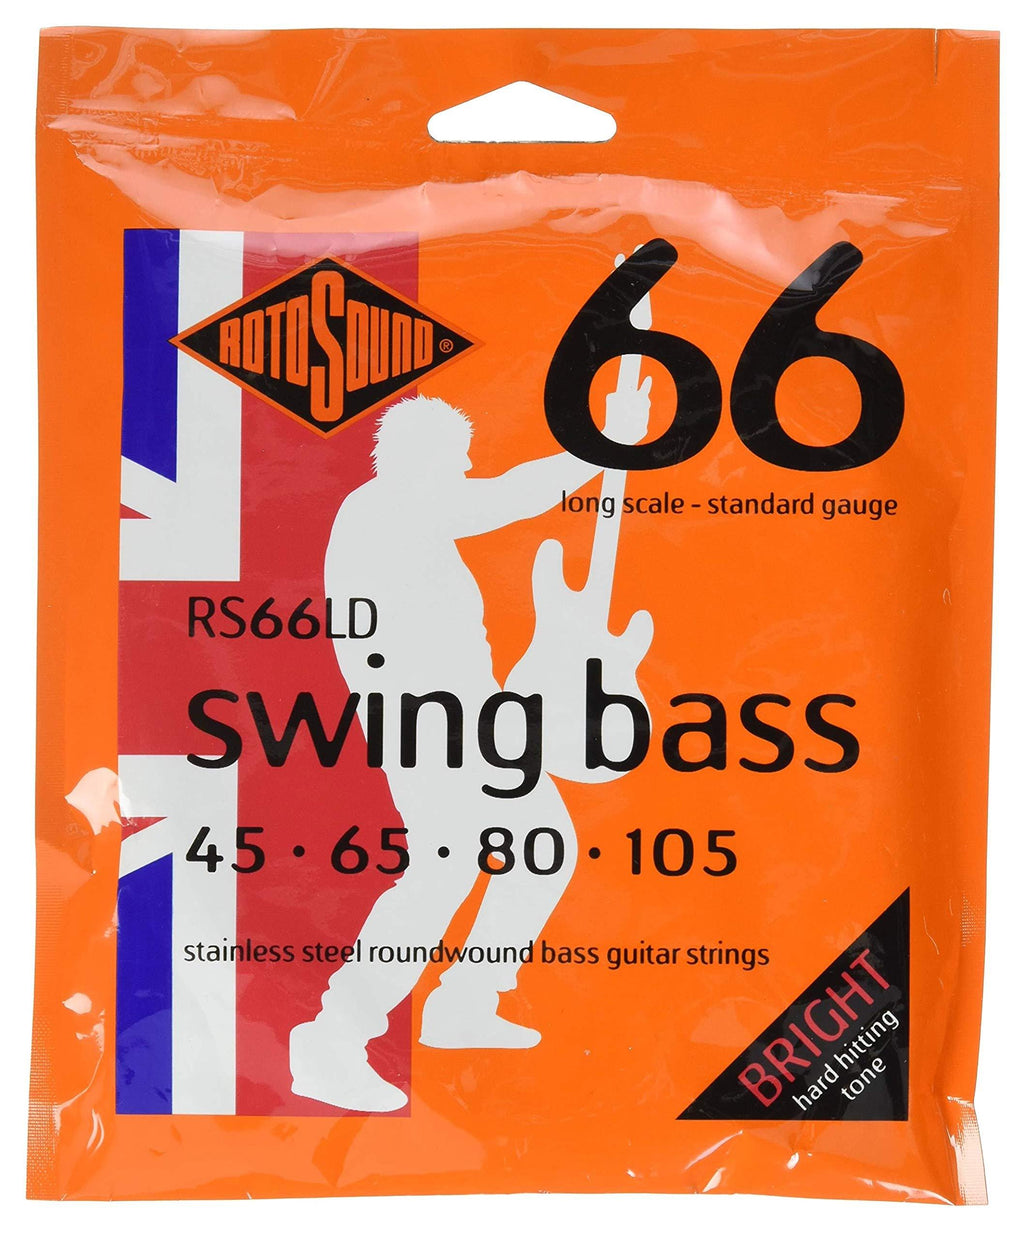 Rotosound Stainless Steel Standard Gauge Roundwound Bass Strings (45 65 80 105), RS66LD Single